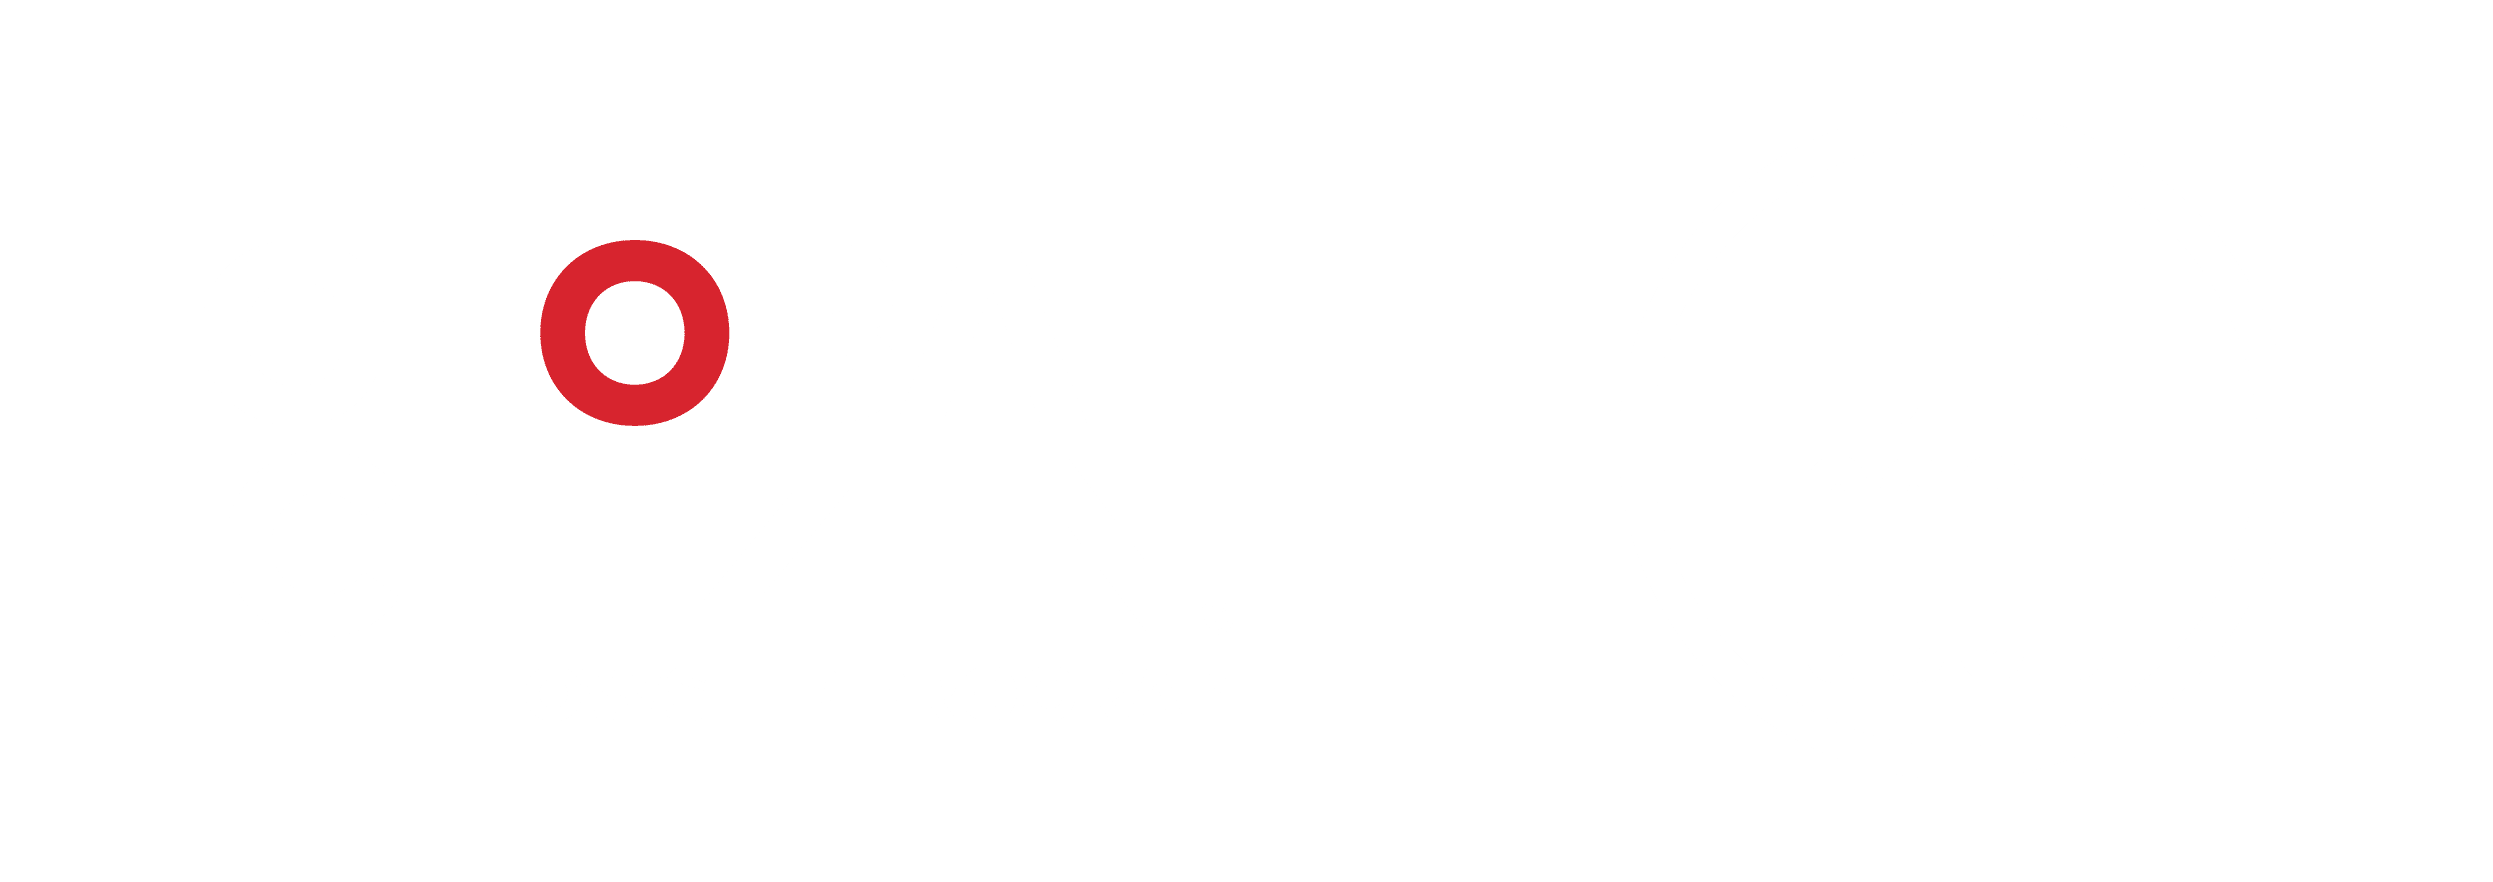 BeyGOOD Global Citizen Fellowship Program 2022 for Young Africans (Fully-funded)